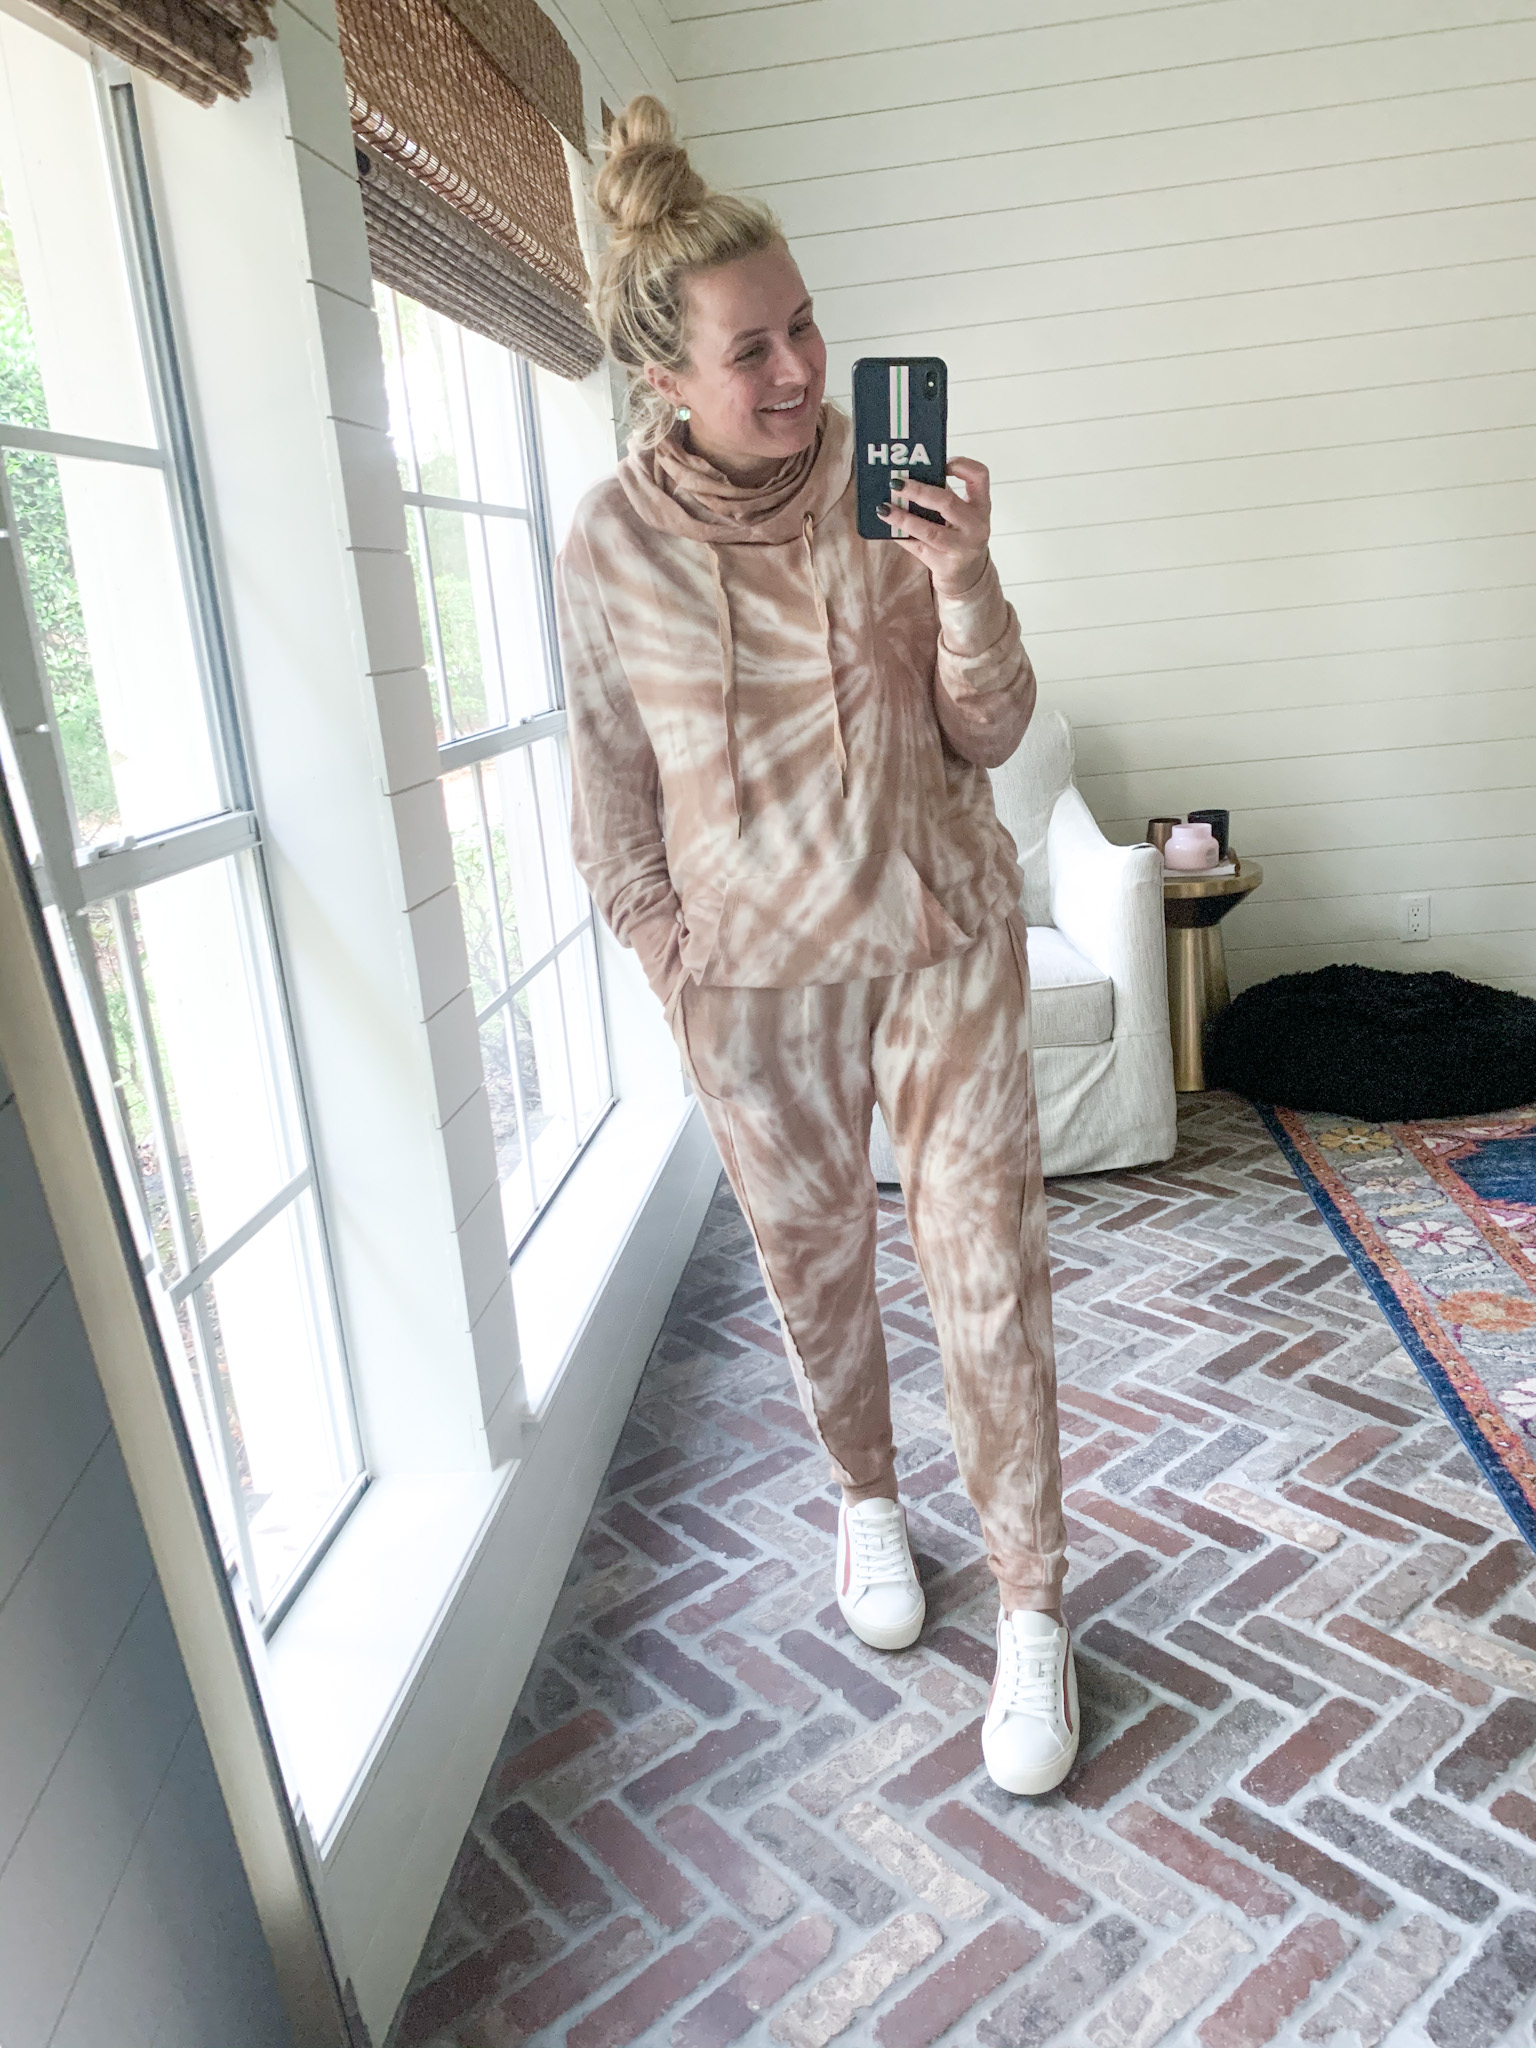 Fall Clothing by popular Houston fashion blog, Fancy Ashley: image of a woman wearing a Walmart Scoop Women's Animal Printed Joggers with Front Seaming, Walmart Scoop Women's Leopard Print French Terry Hoodie, and a pair of Walmart Time and Tru Women’s Fashion Sneakers.